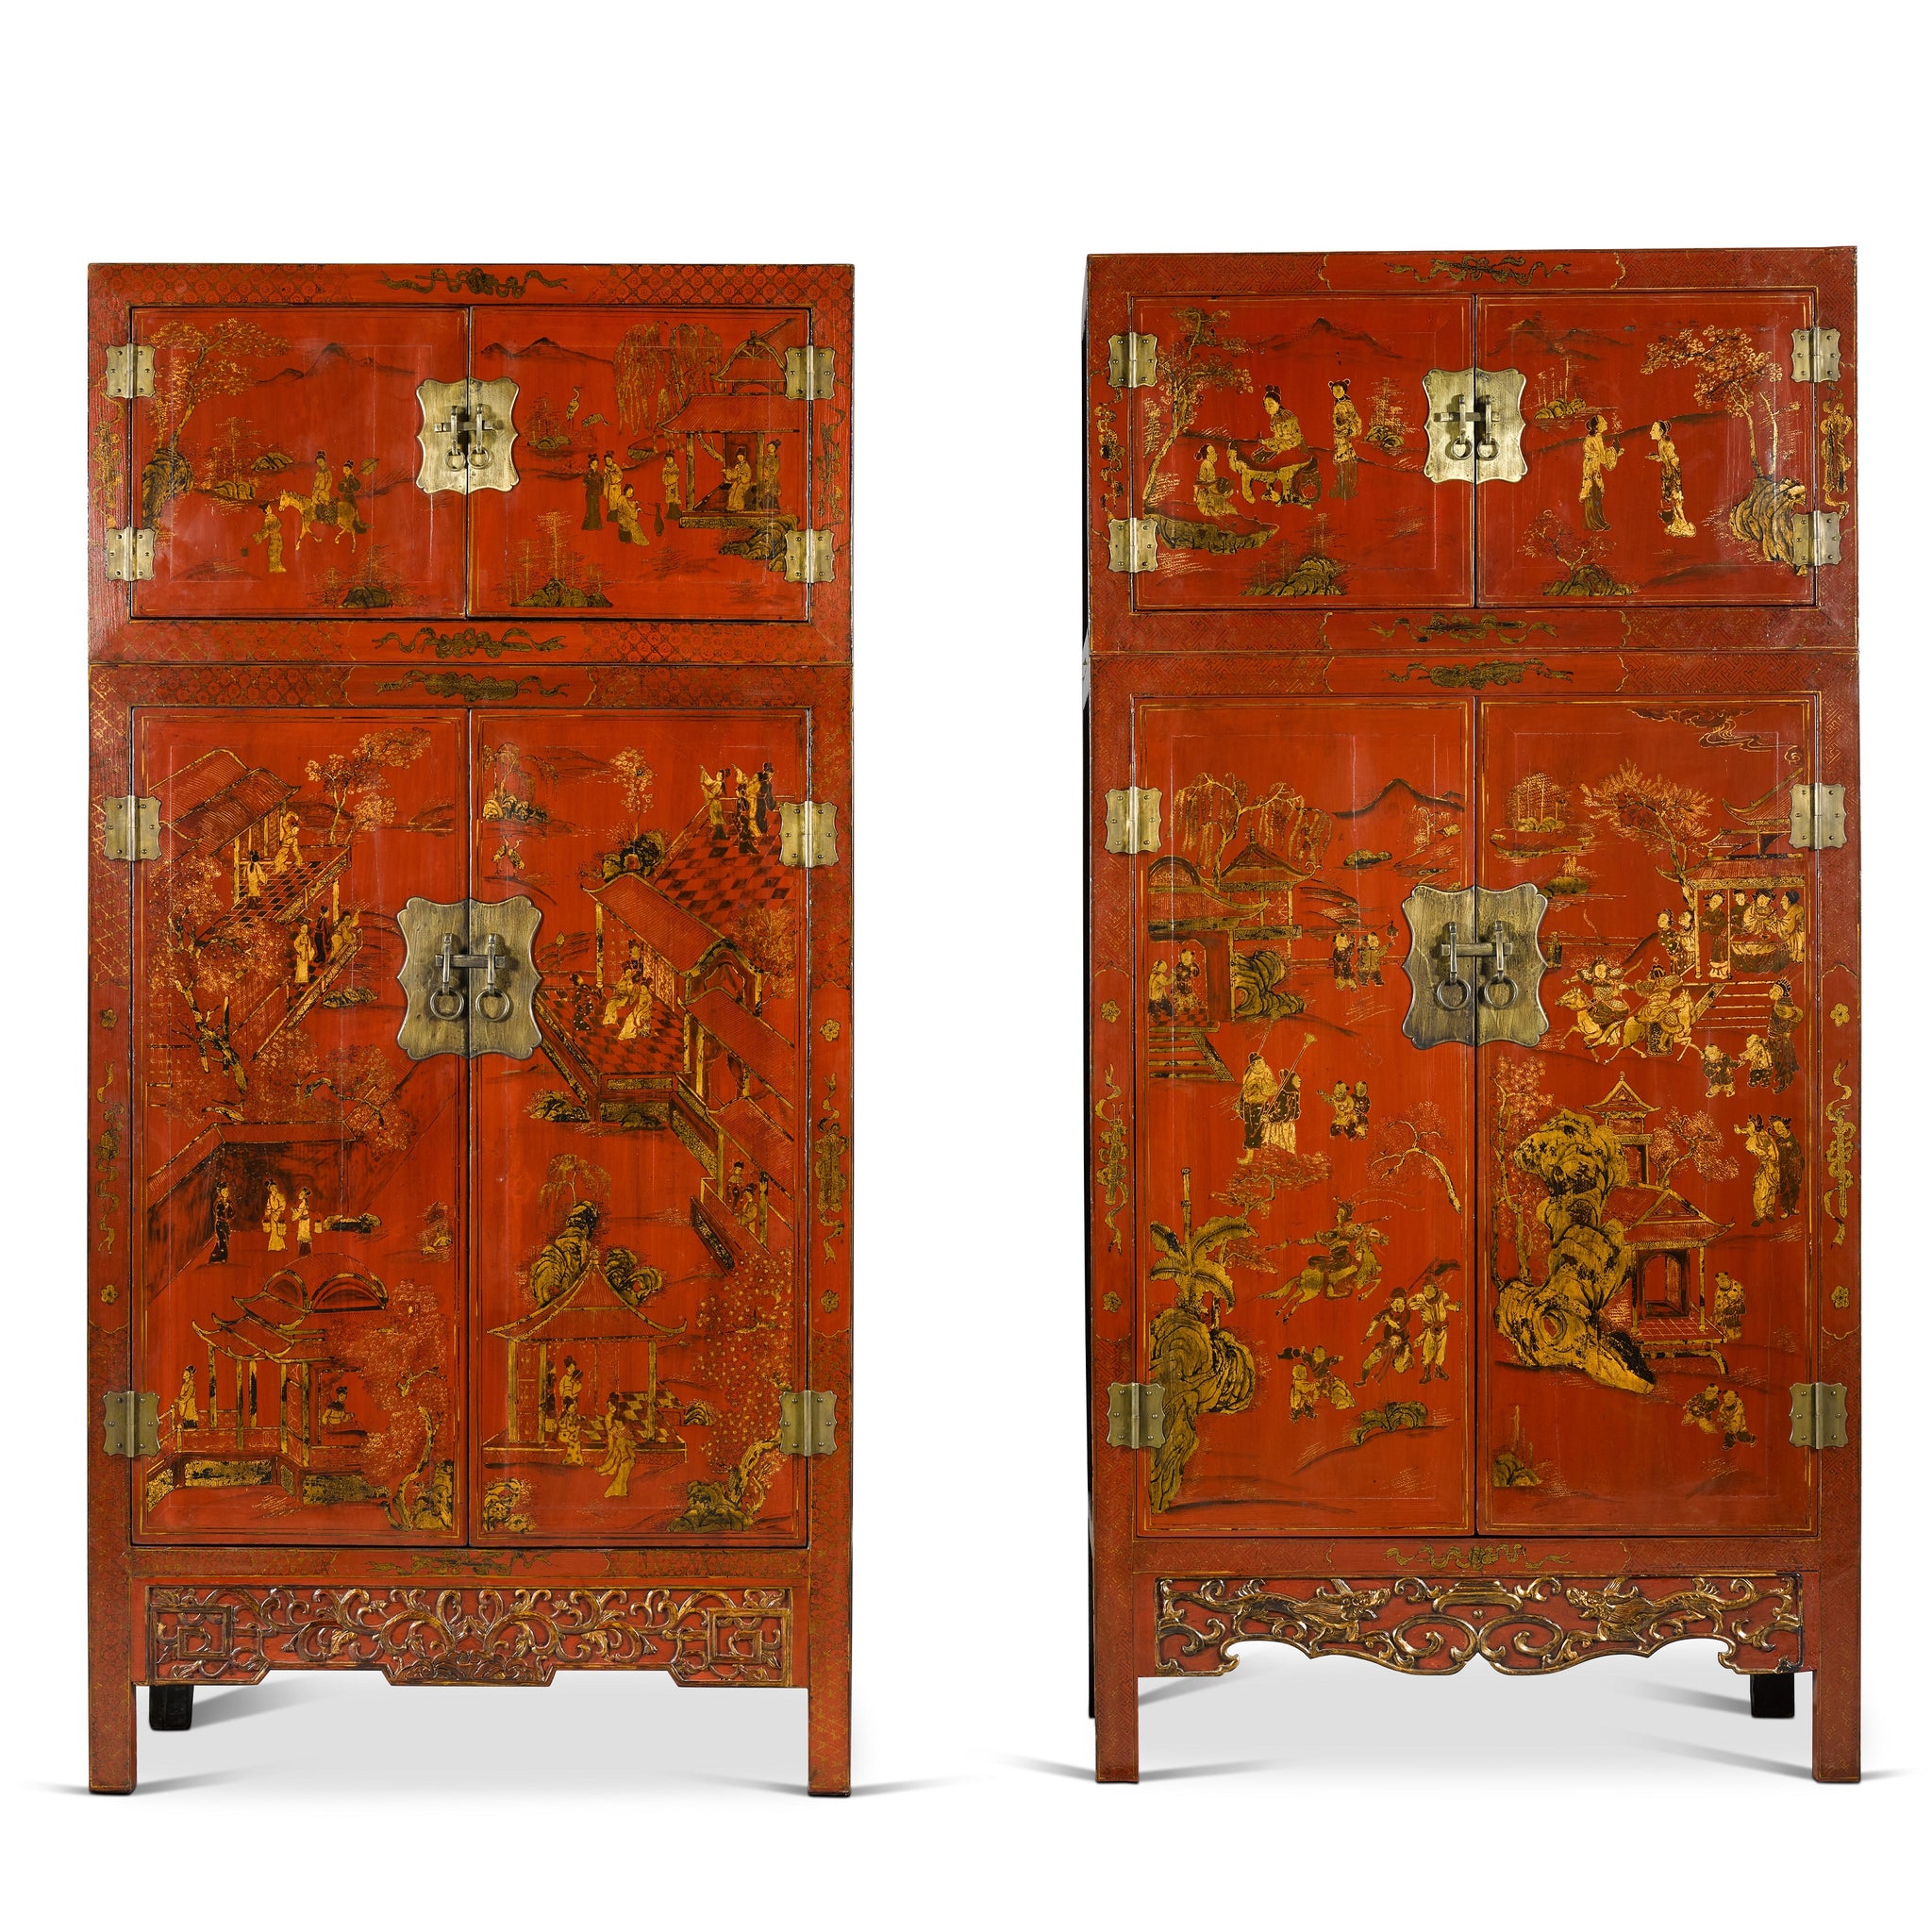 Pair of Chinese Lacquer Cabinets